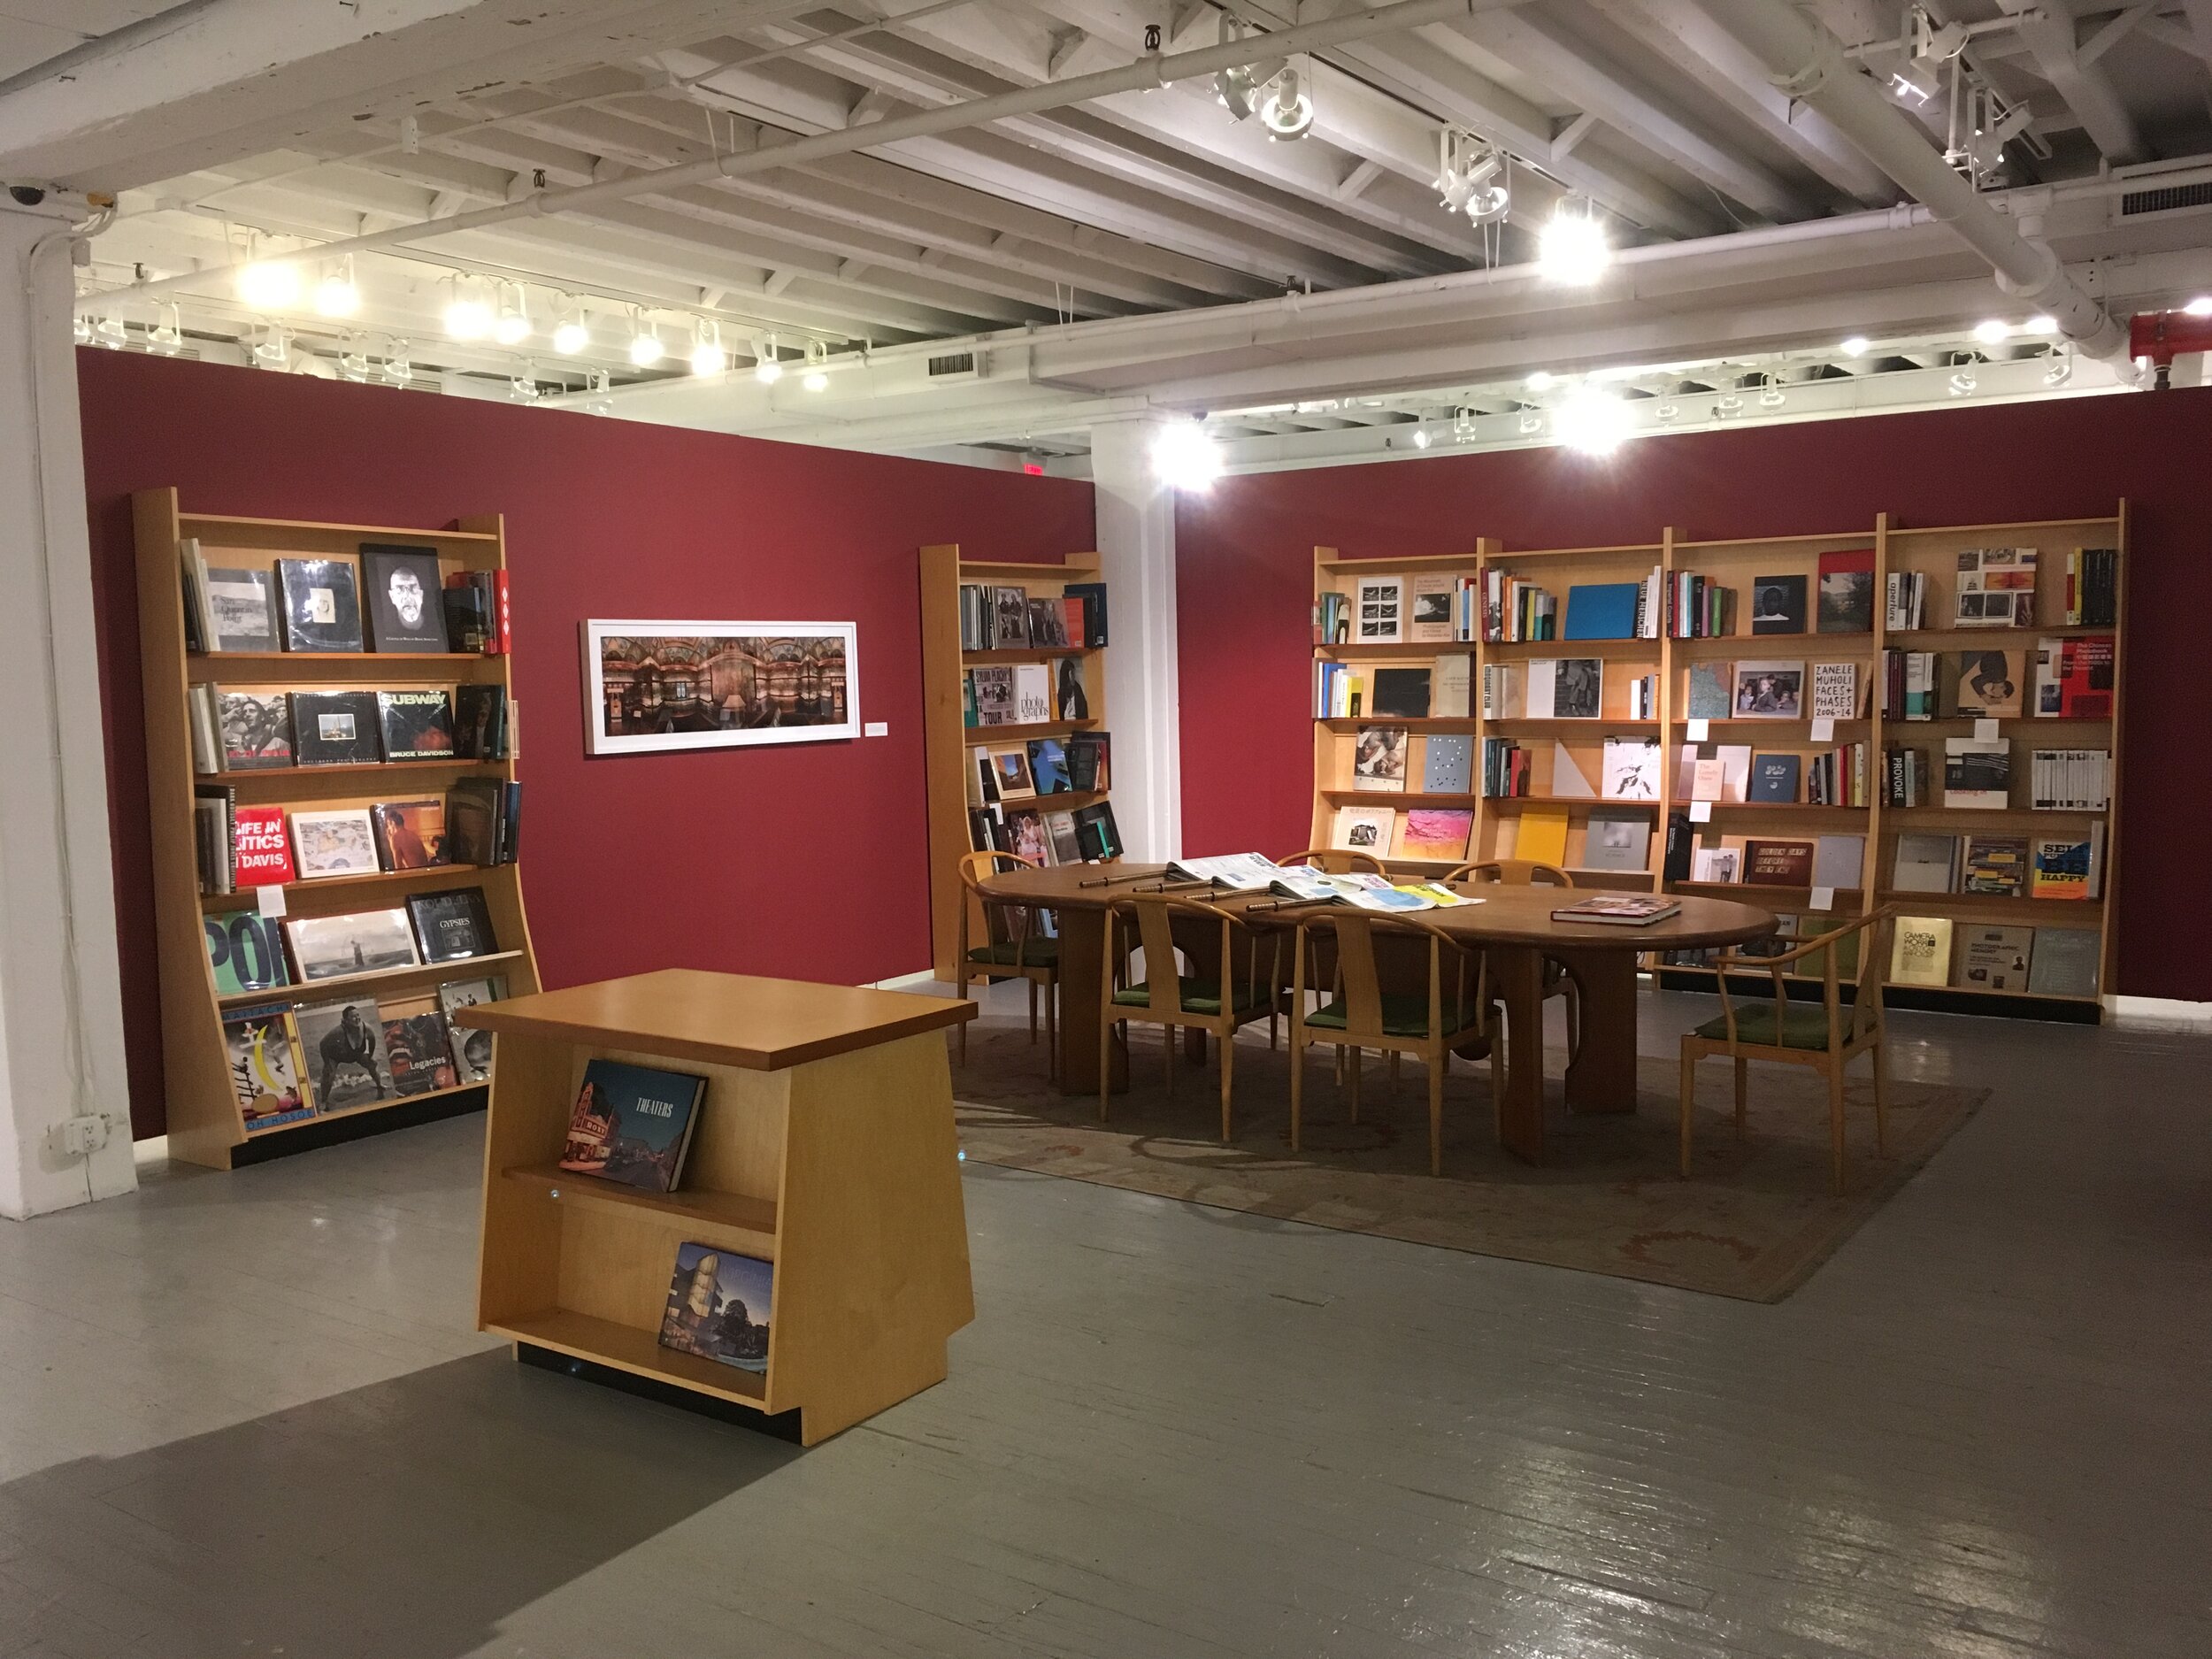   Photobook reading room installation for    “The Library Exhibition: Thomas R. Schiff”    at Aperture Gallery (Mar. 15 2017 - Apr. 20, 2017).  